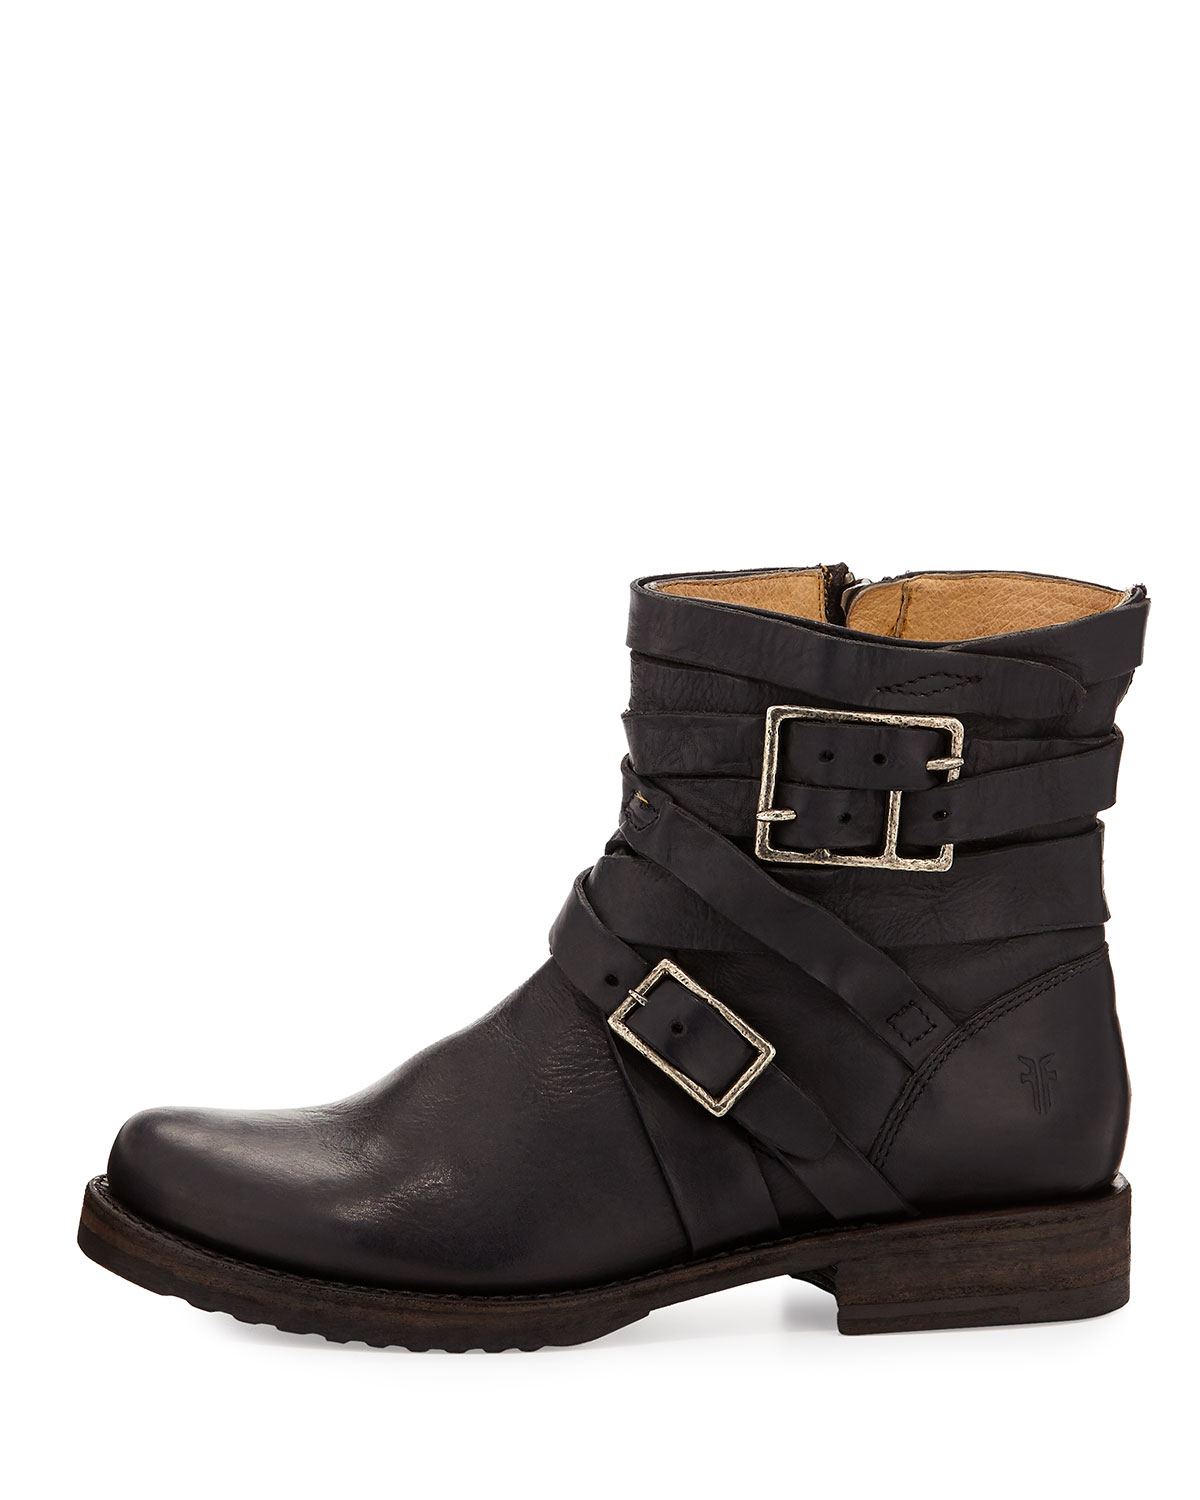 Frye Veronica Strappy Short Engineer Boot in Black | Lyst